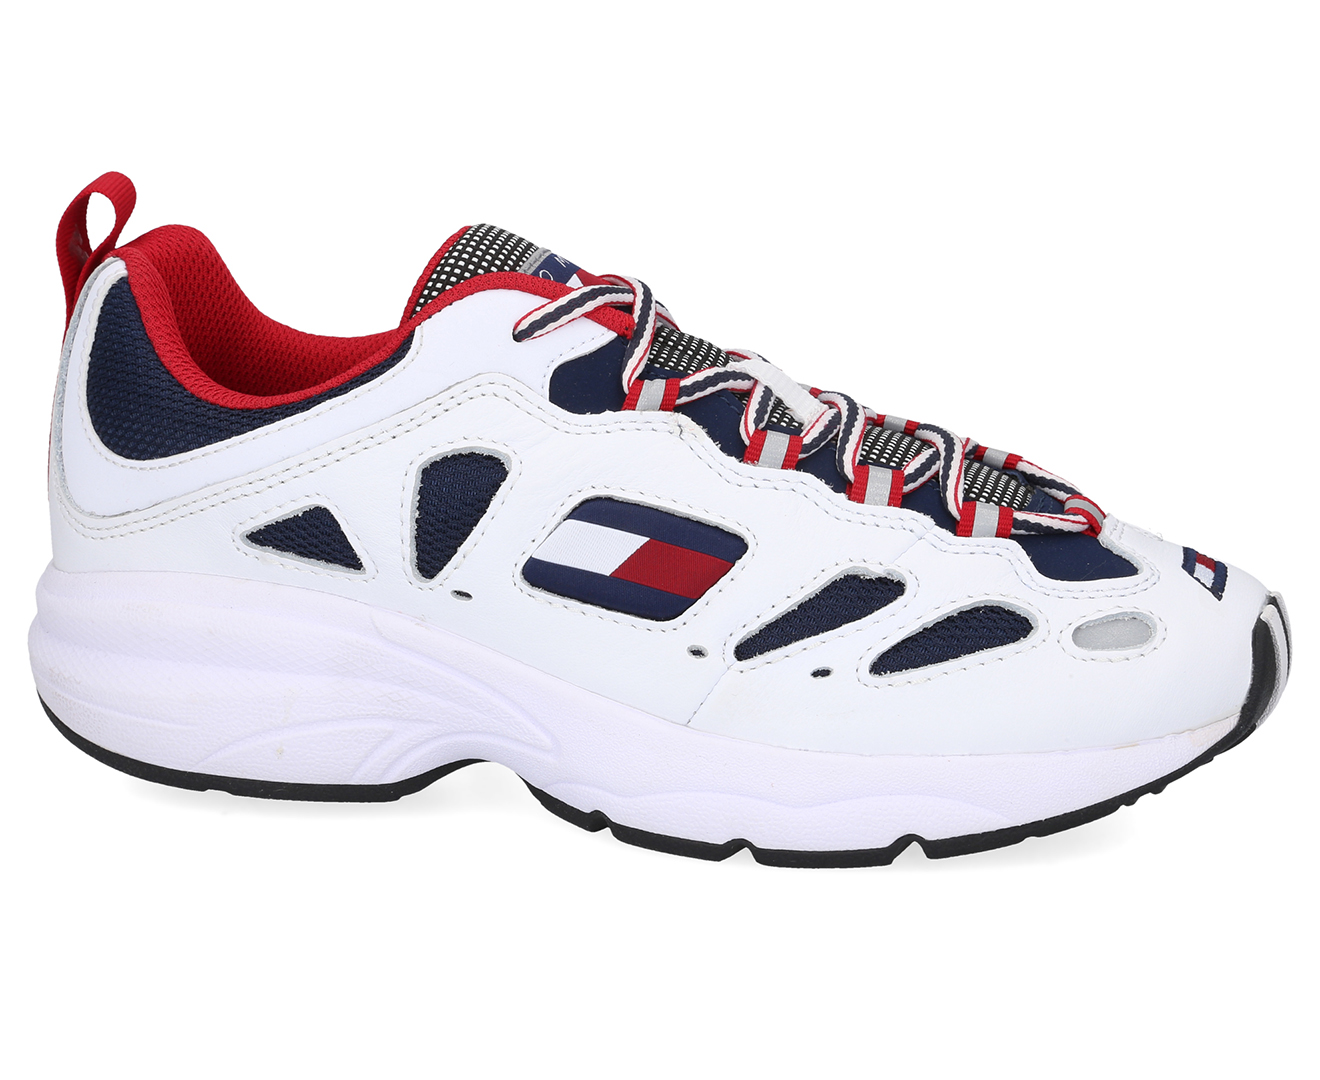 Tommy Hilfiger Men's Heritage Retro Sneakers - White/Red/Blue | Catch ...